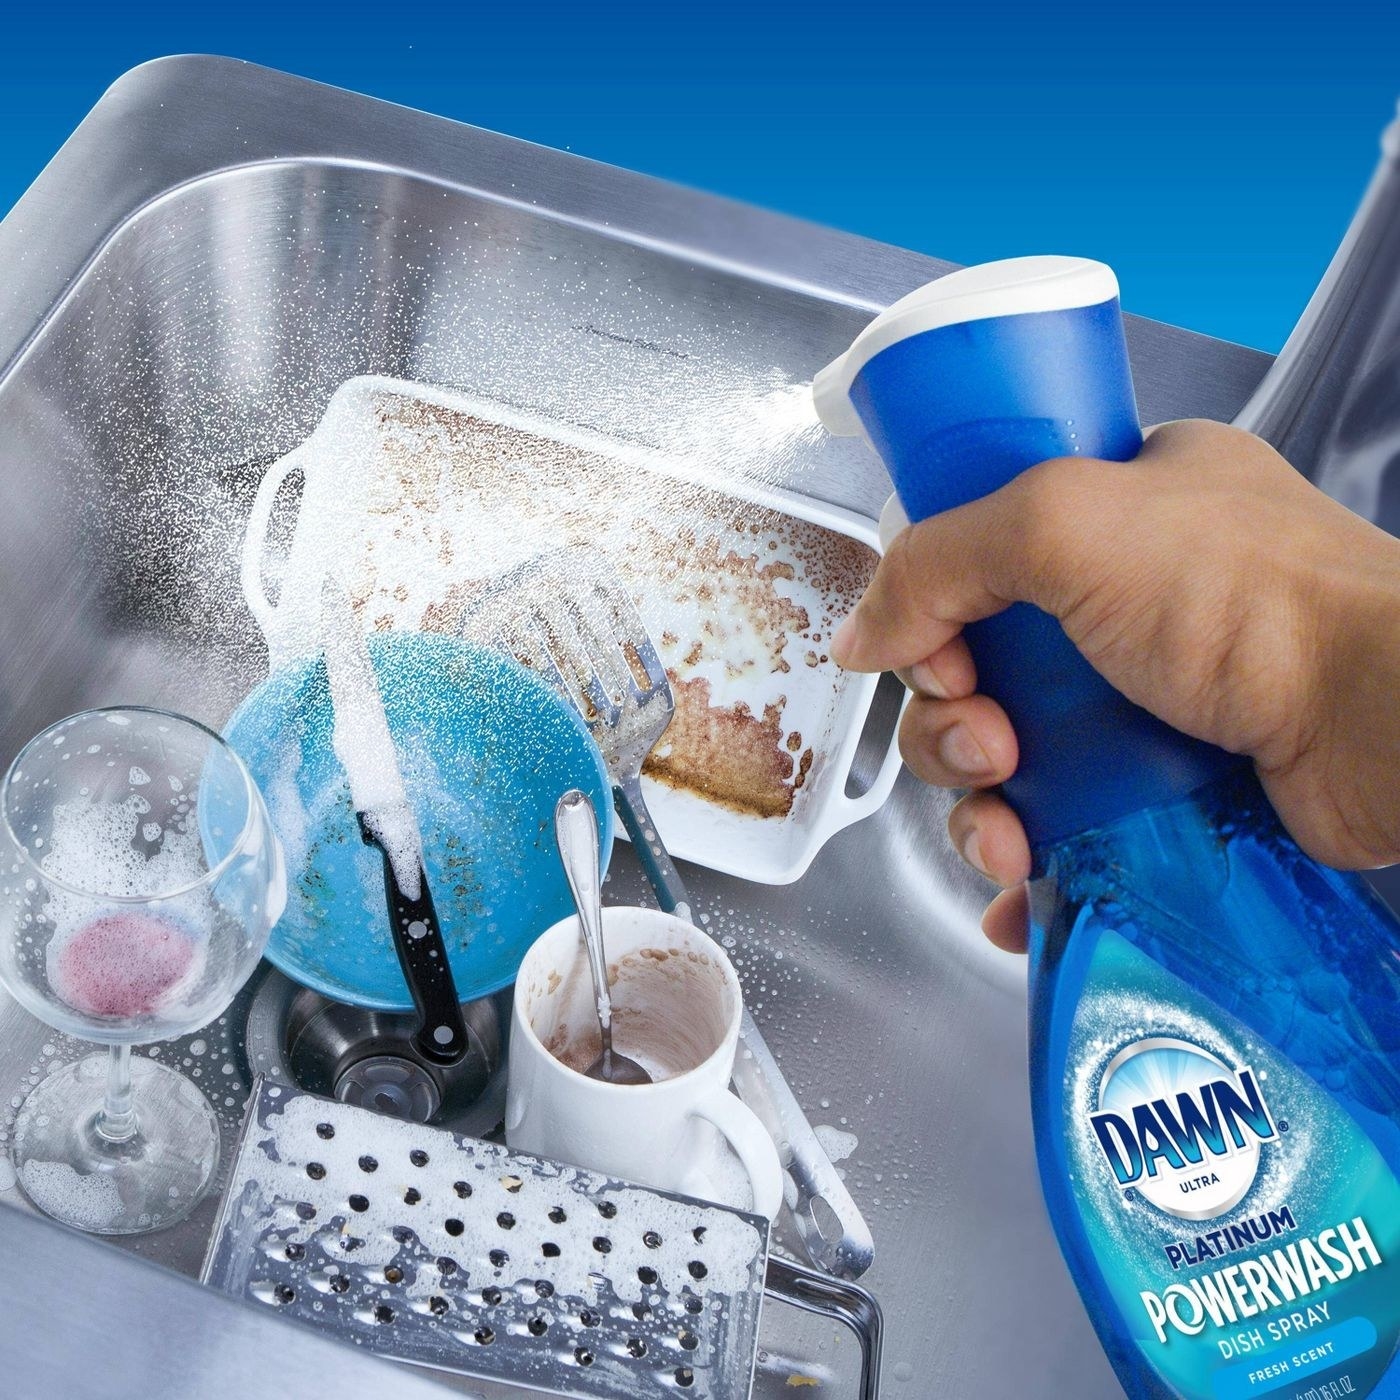 The spray bottle being used to cover a pile of dirty dishes in a sink